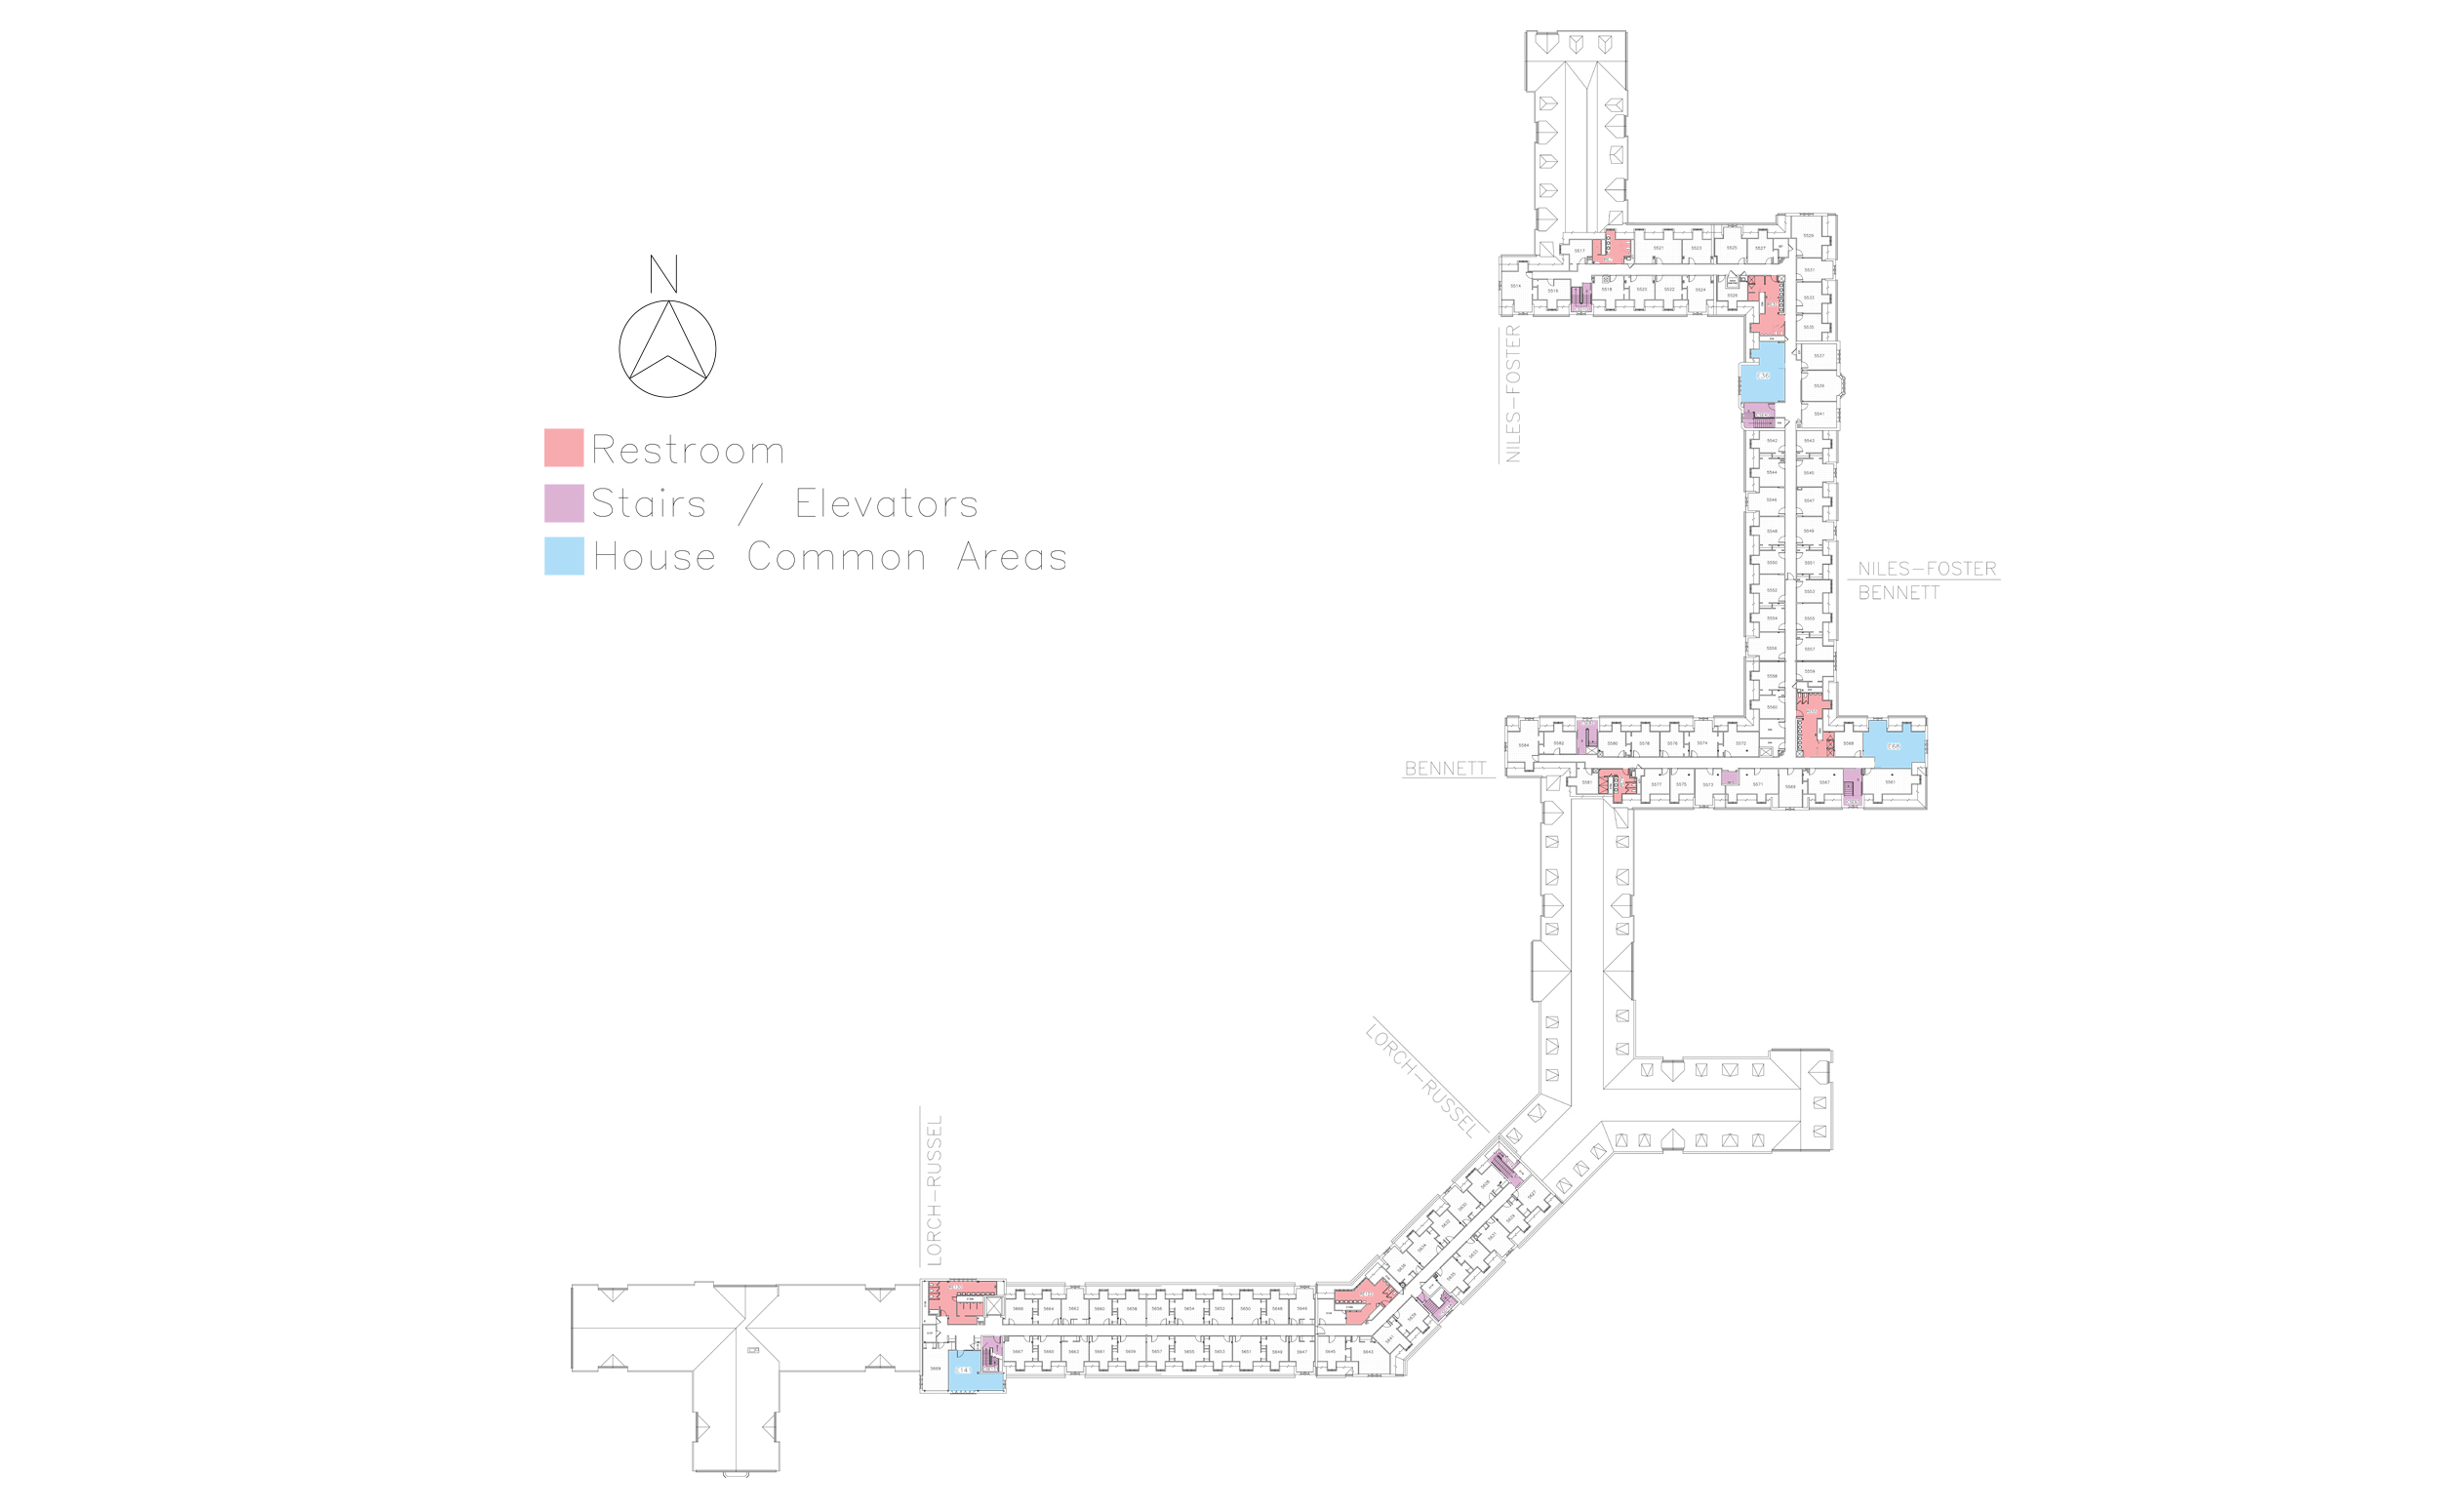 Floor plan showing house locations on the fifth floor of Friley Hall.